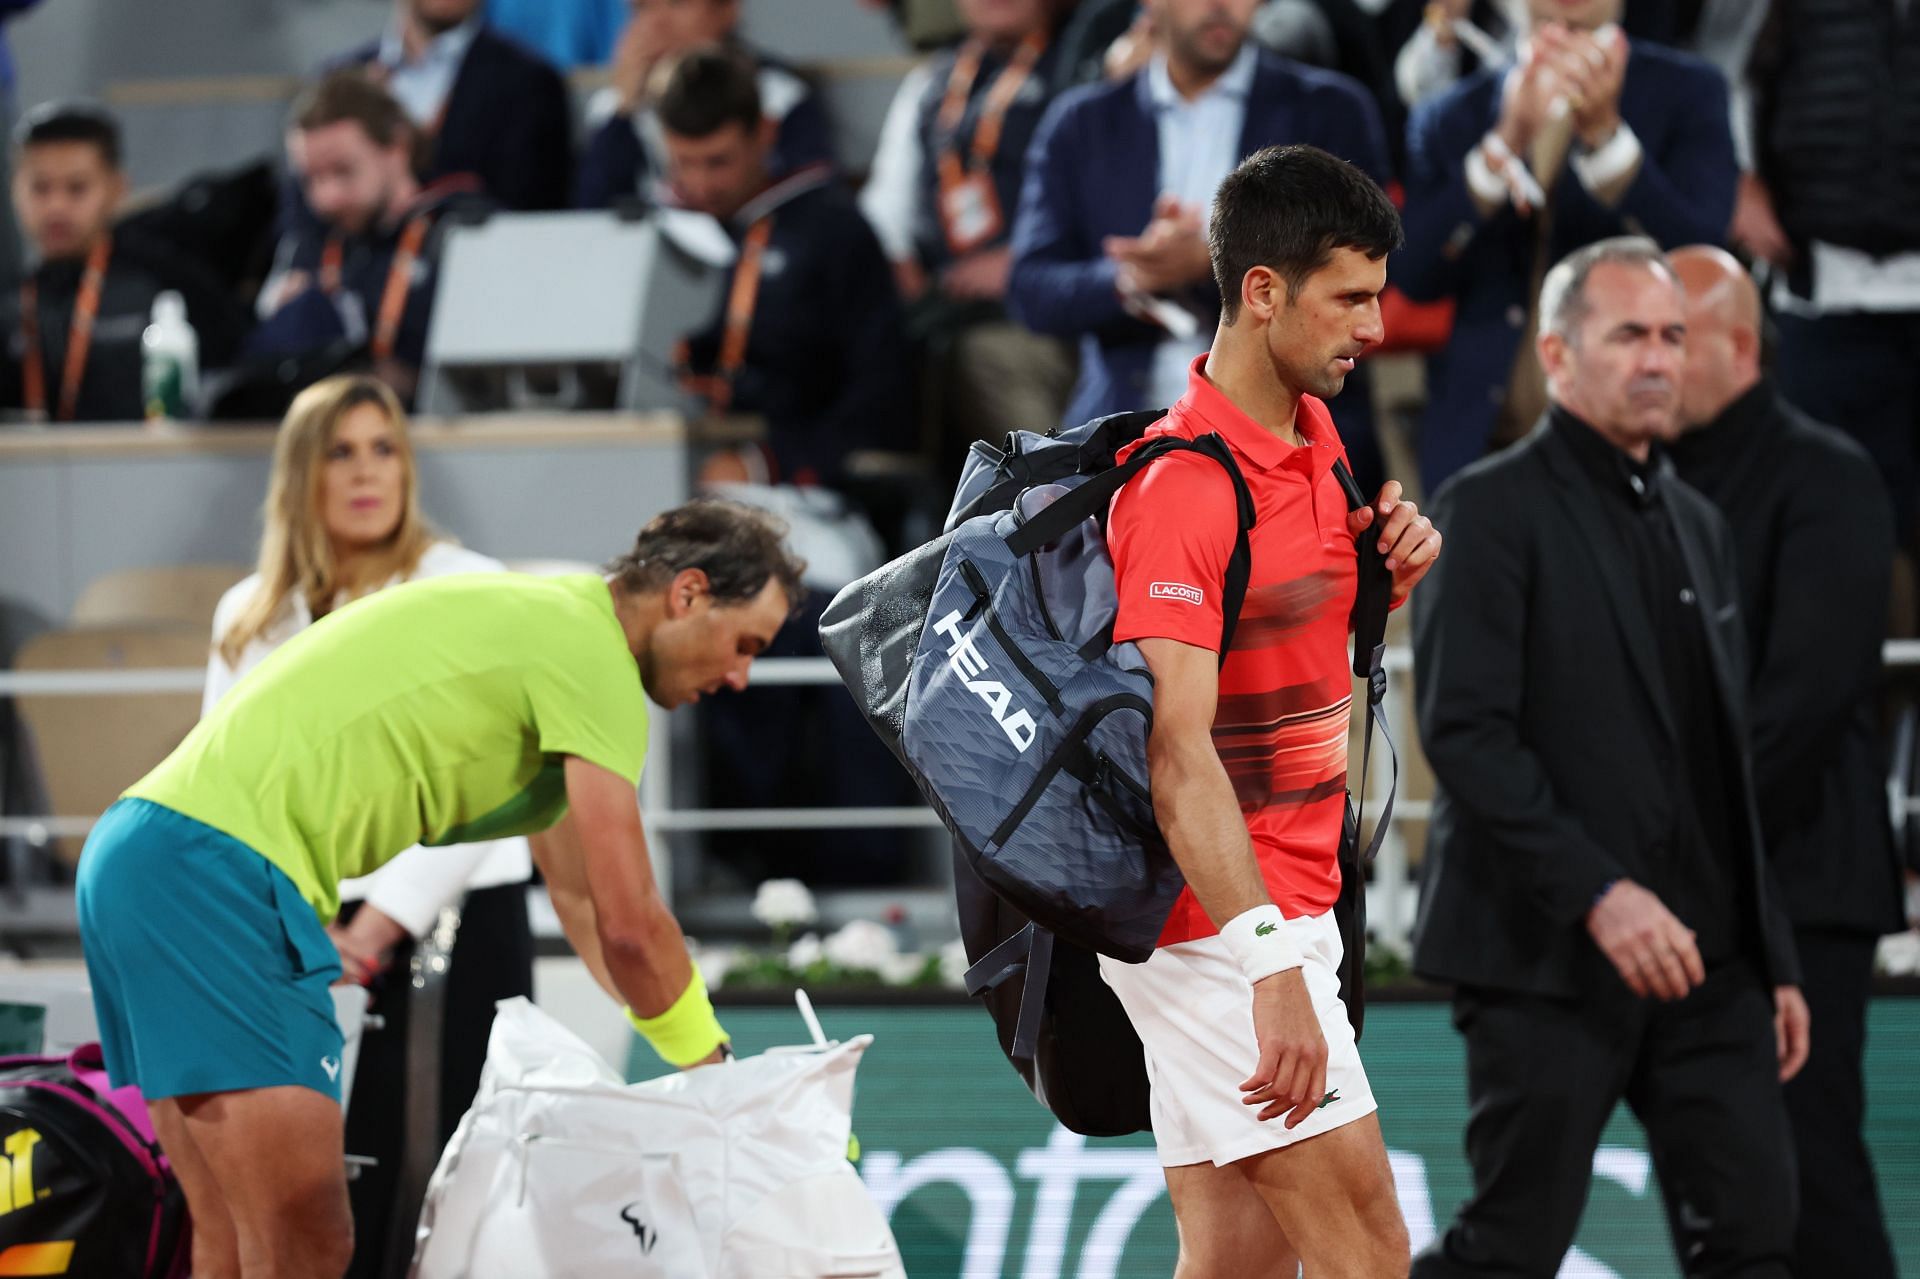 Novak Djokovic will be aiming for seventh Wimbledon title after a disappointing season